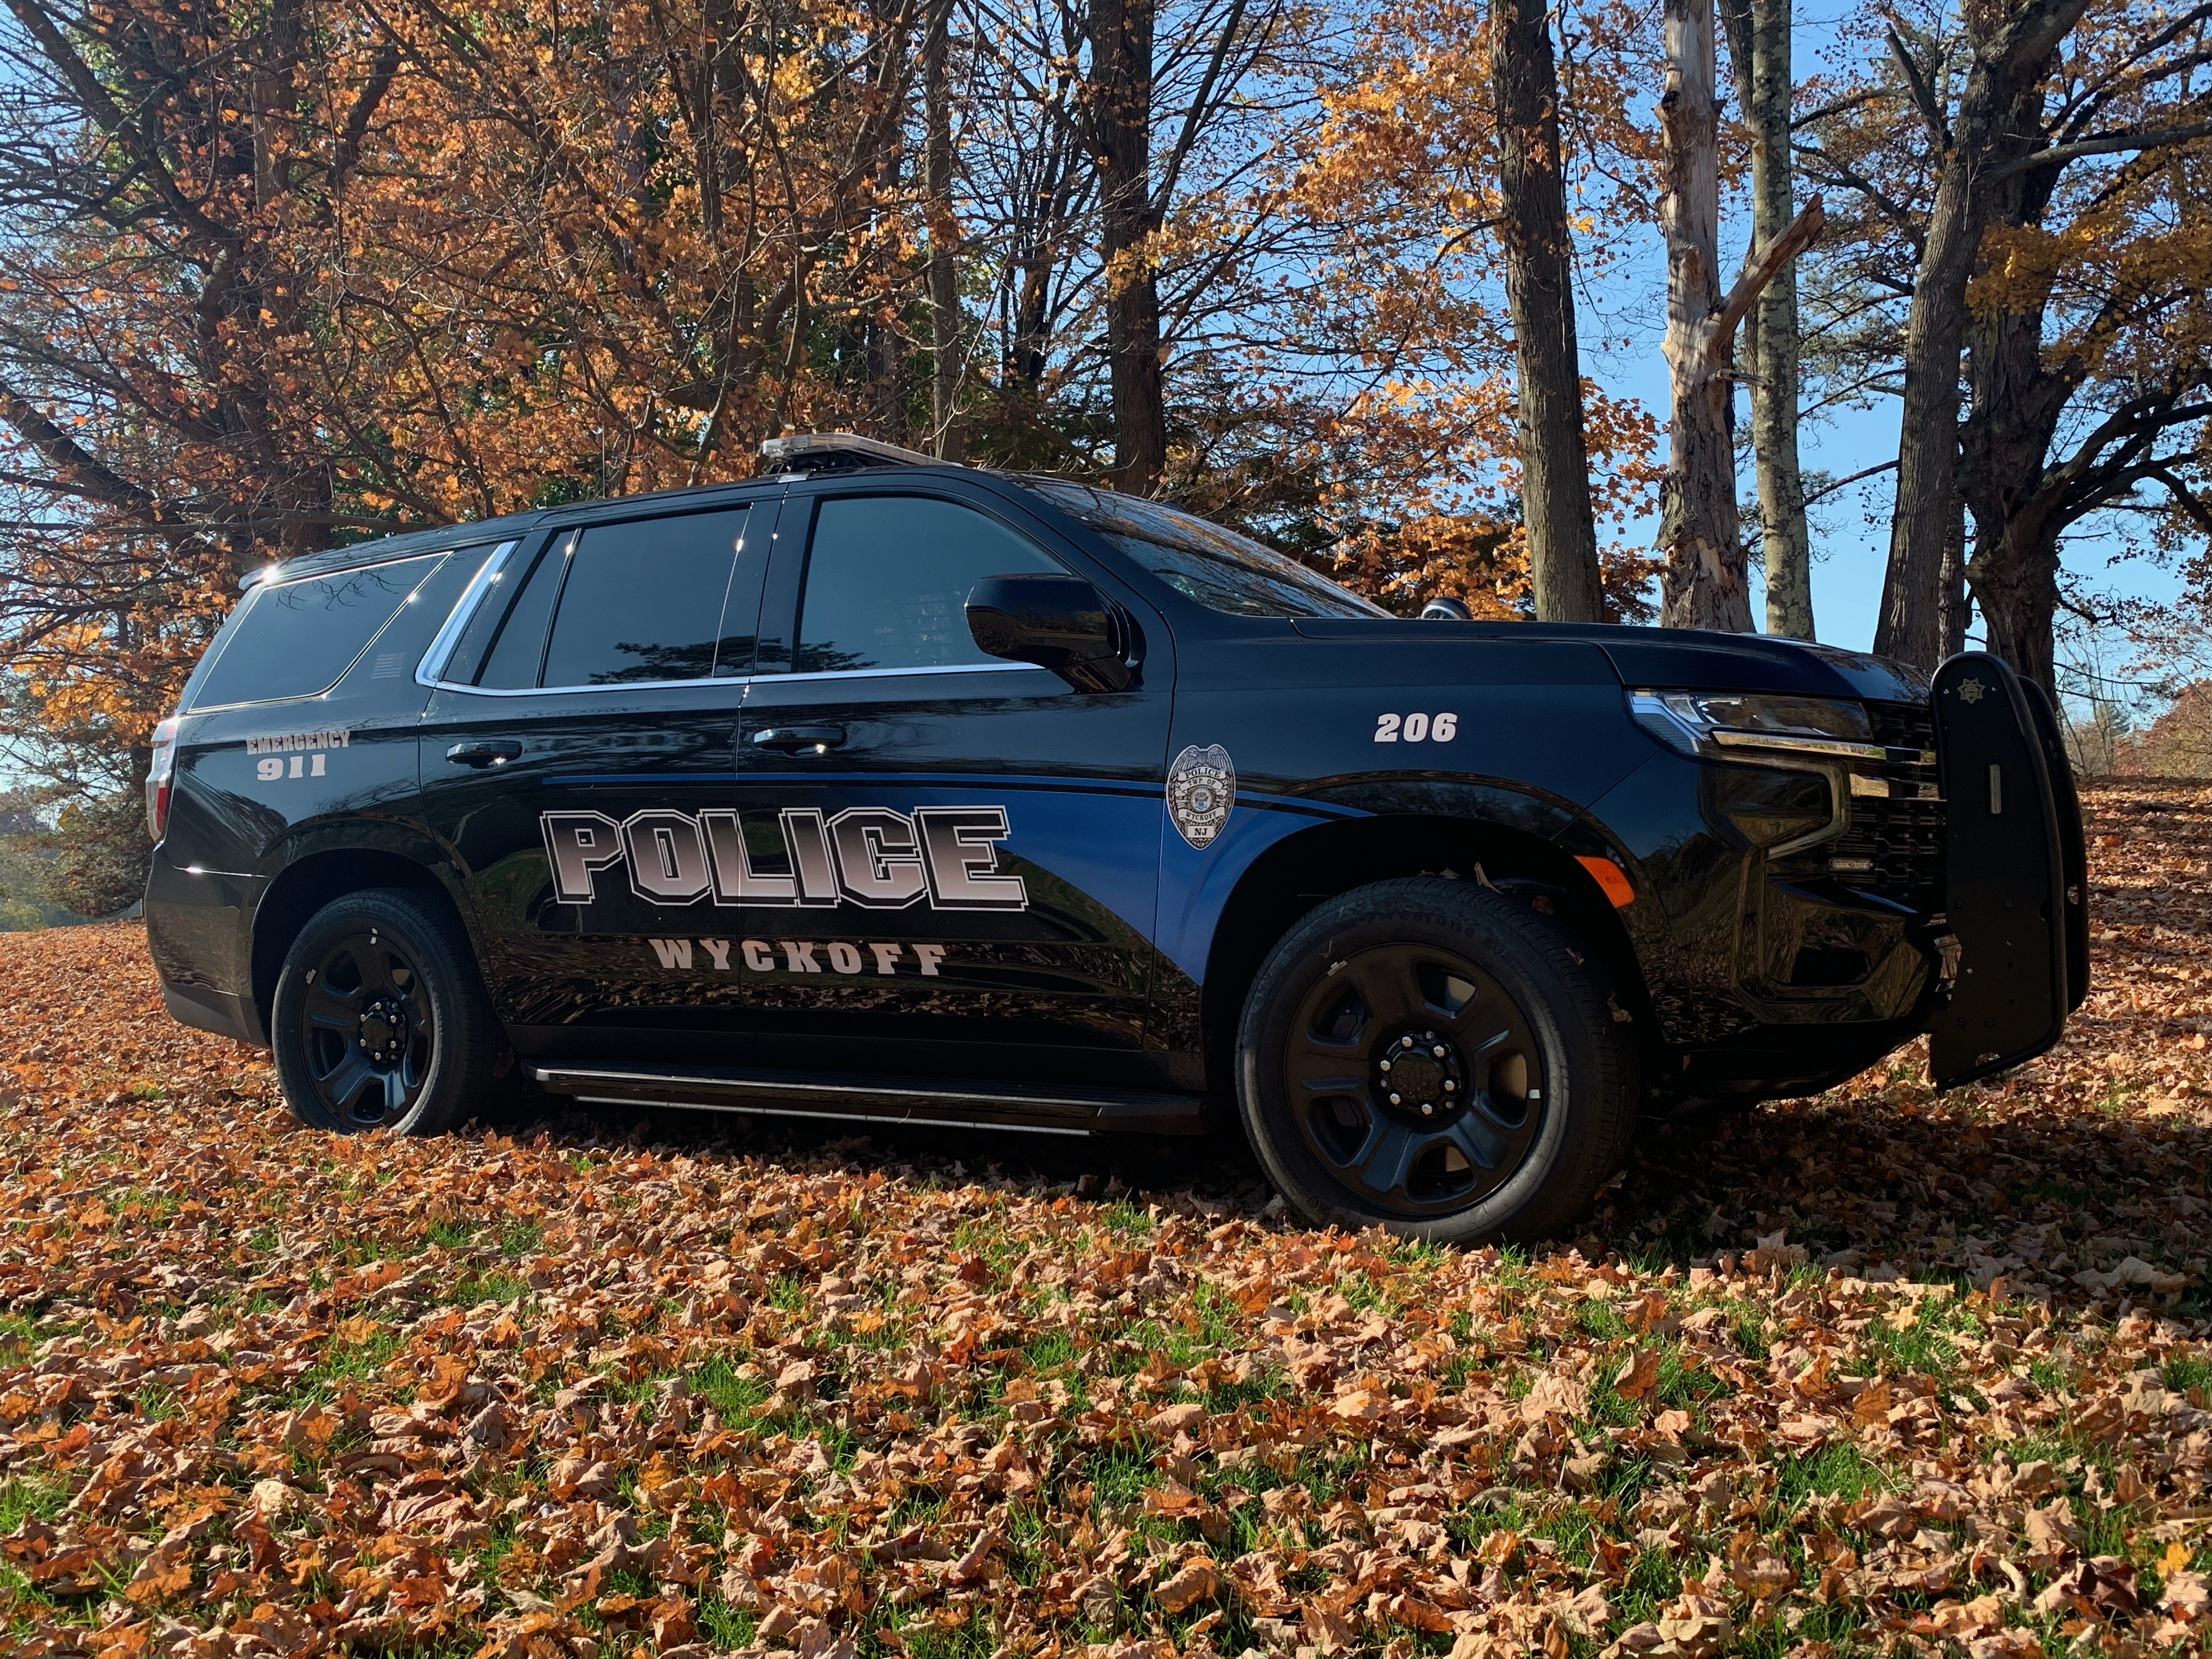 Wyckoff Police Department, NJ Public Safety Jobs